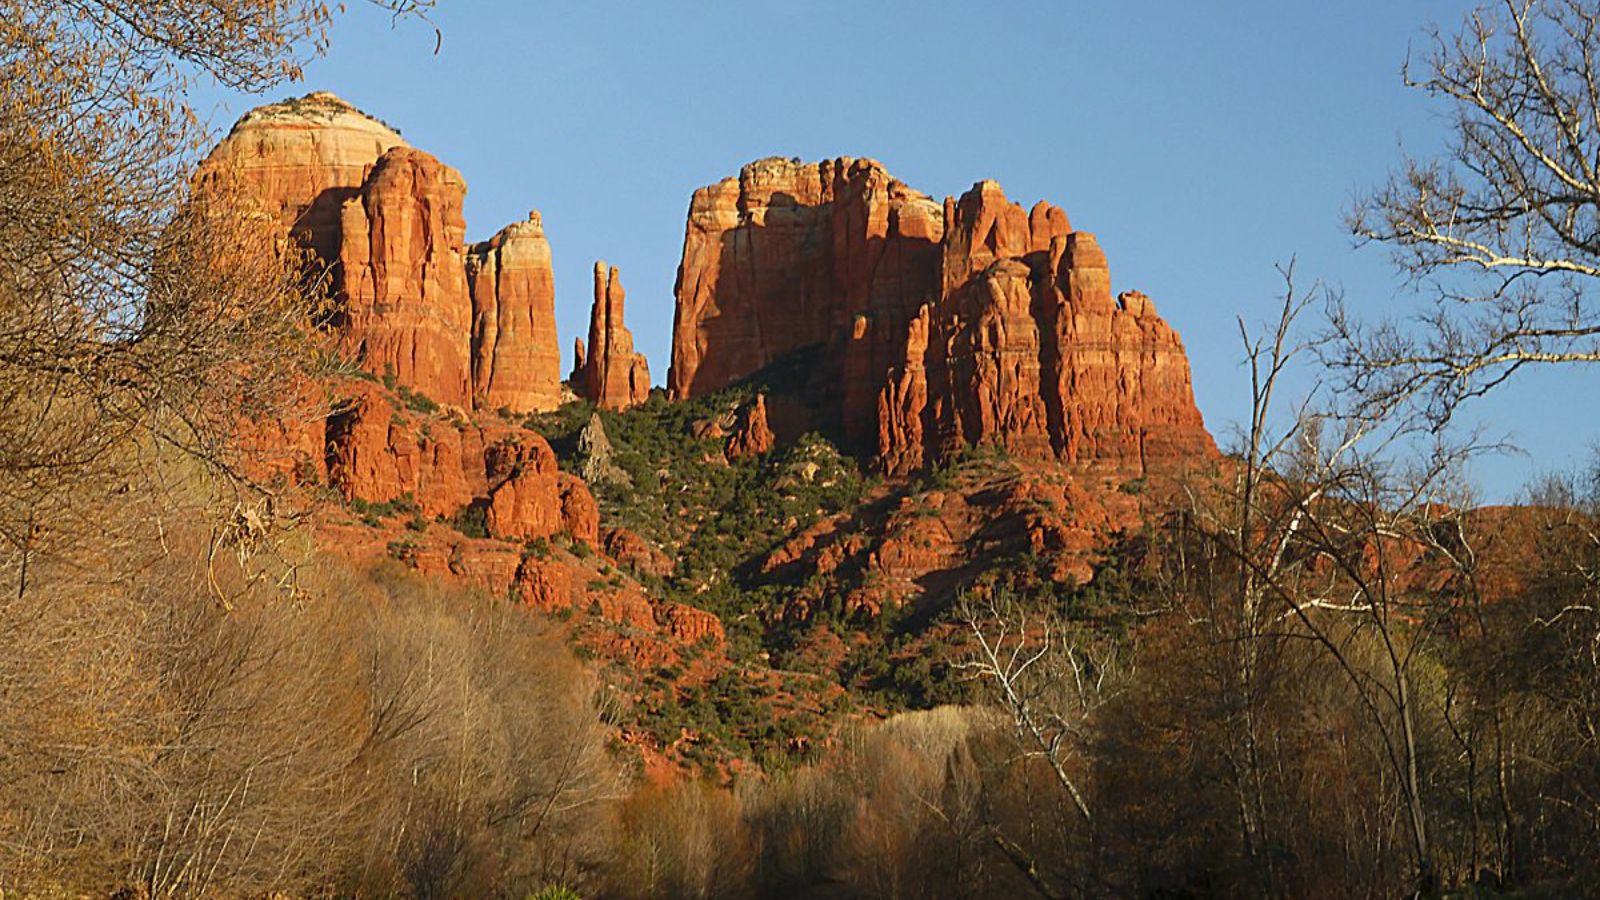 <p>Even though Sedona’s weather and golf courses provide an amazing weekend escape, such activities are now harder to enjoy in the region. Long a favorite pastime in the region, shopping has turned heavily tourist-focused, and you may have to avoid the hordes of timeshare salespeople trying to get you to buy one.</p>